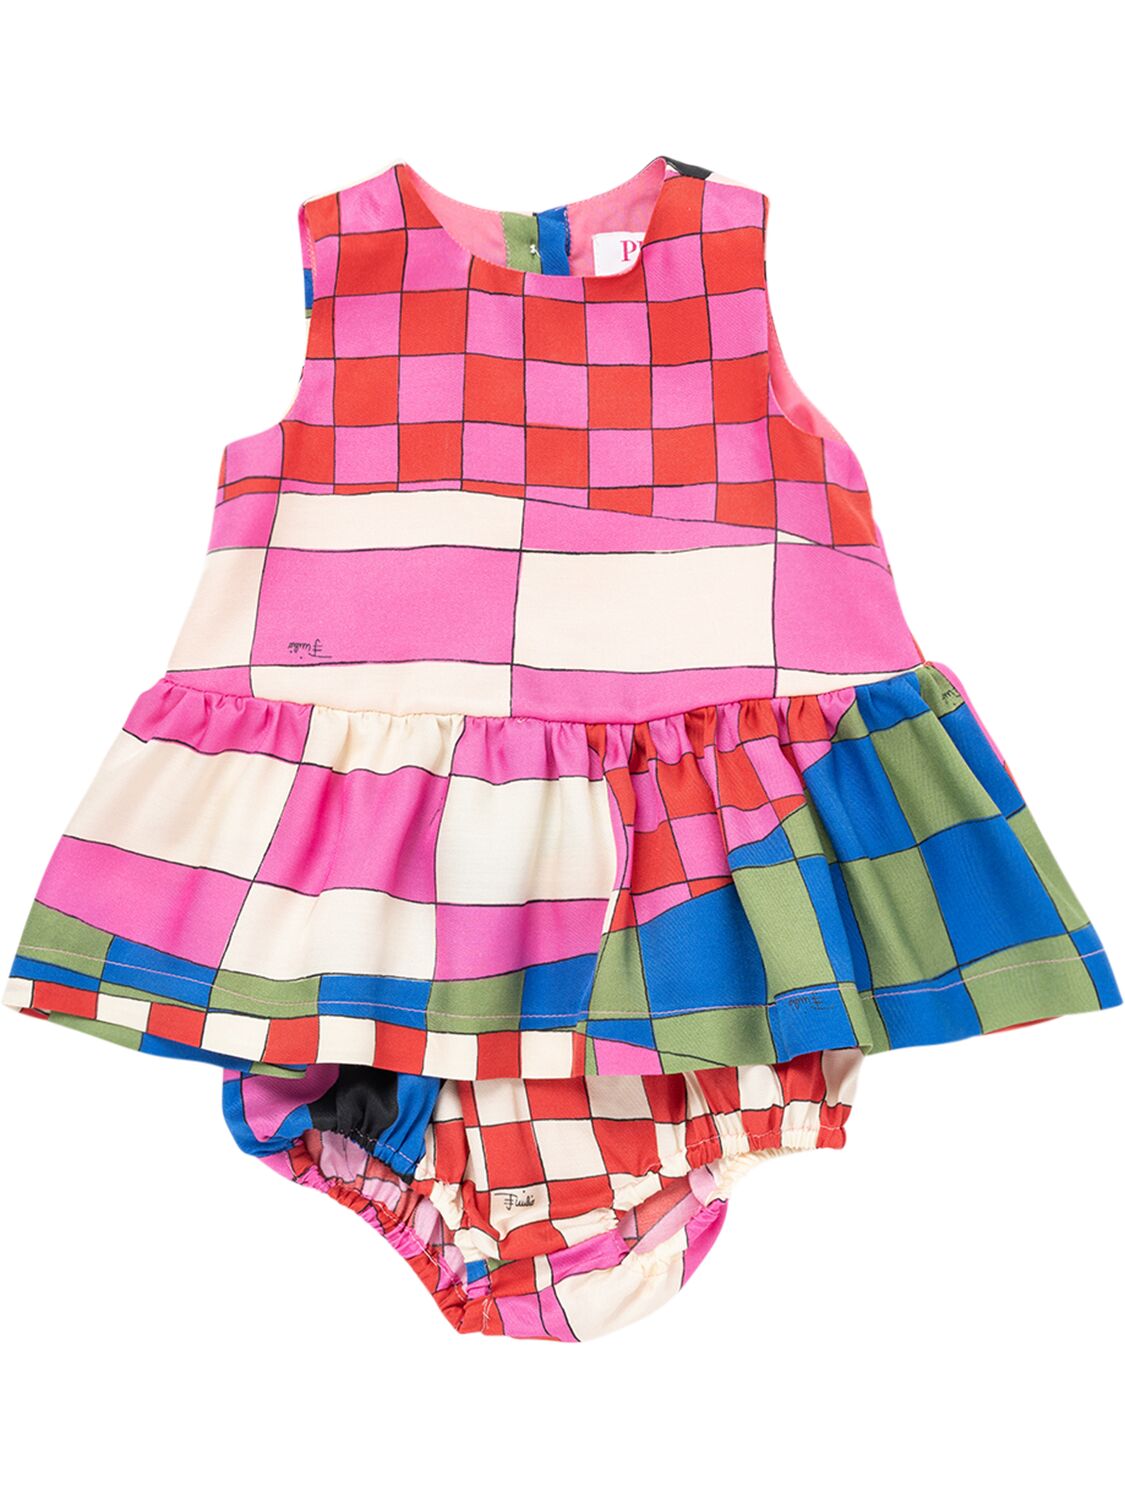 Image of Matching Printed Dress & Diaper Cover